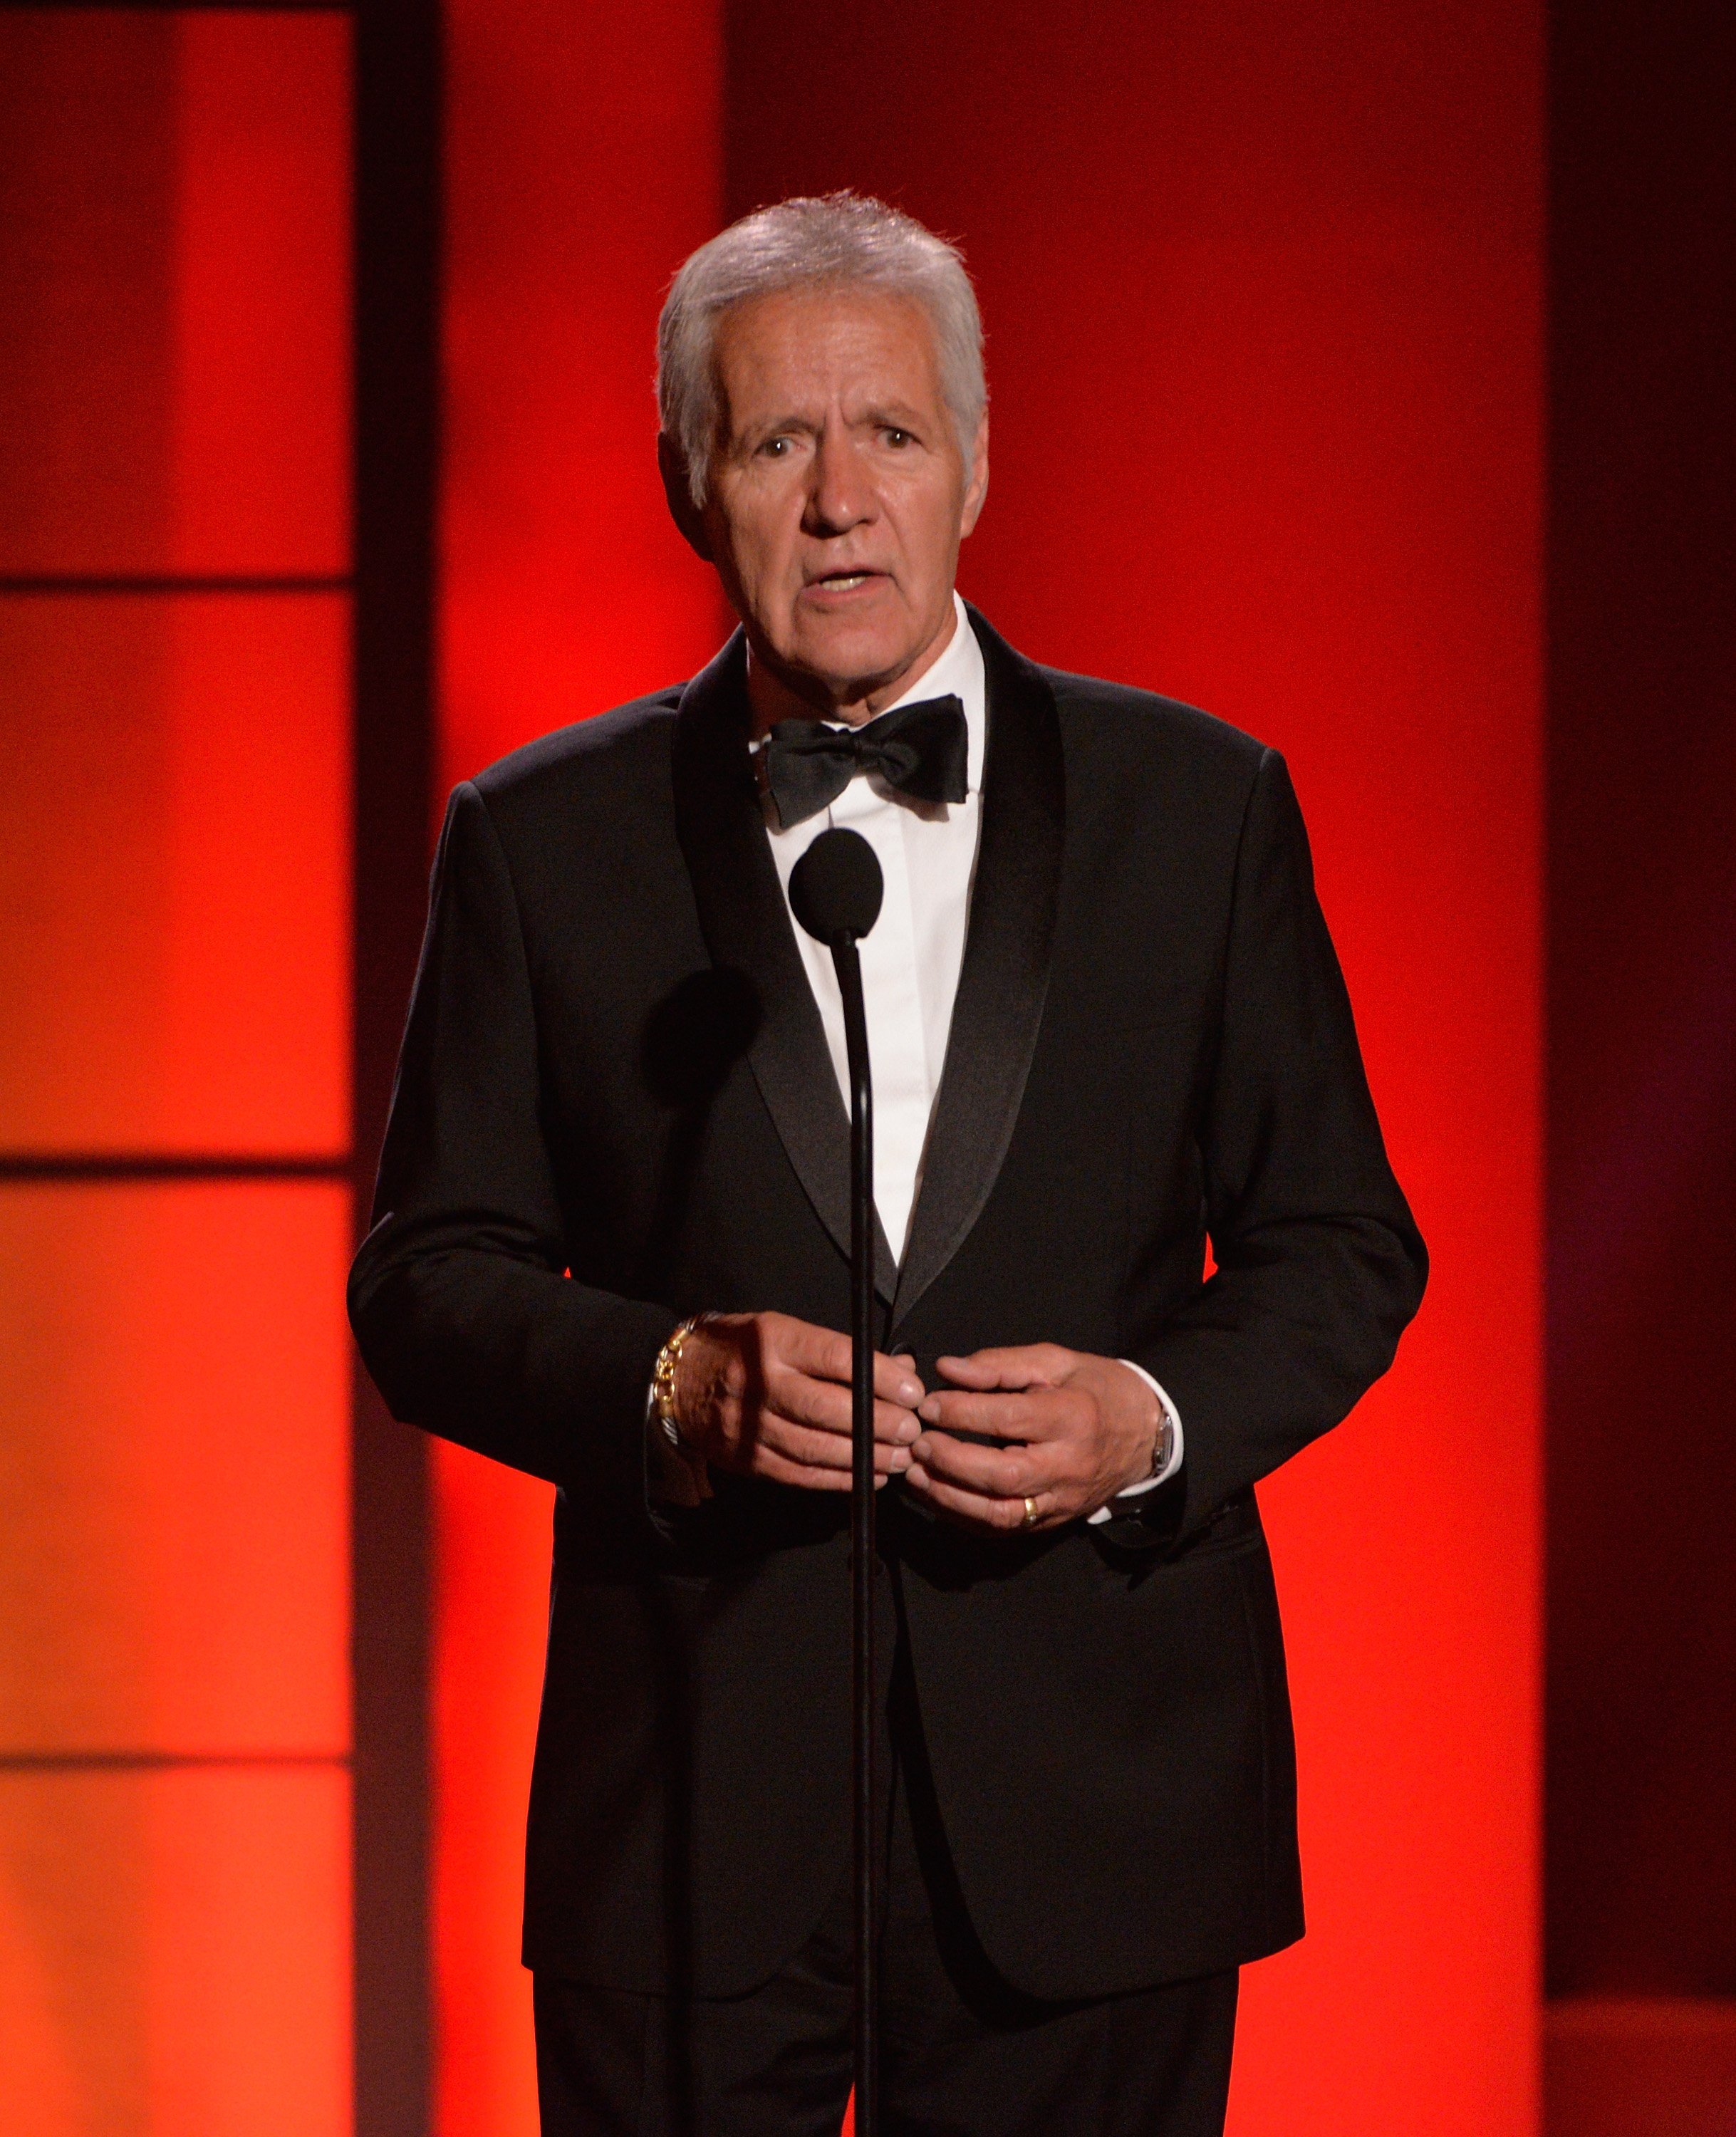 Alex Trebek speaking at the 44th annual Daytime Emmy Awards in Pasadena, California | Photo: Getty Images